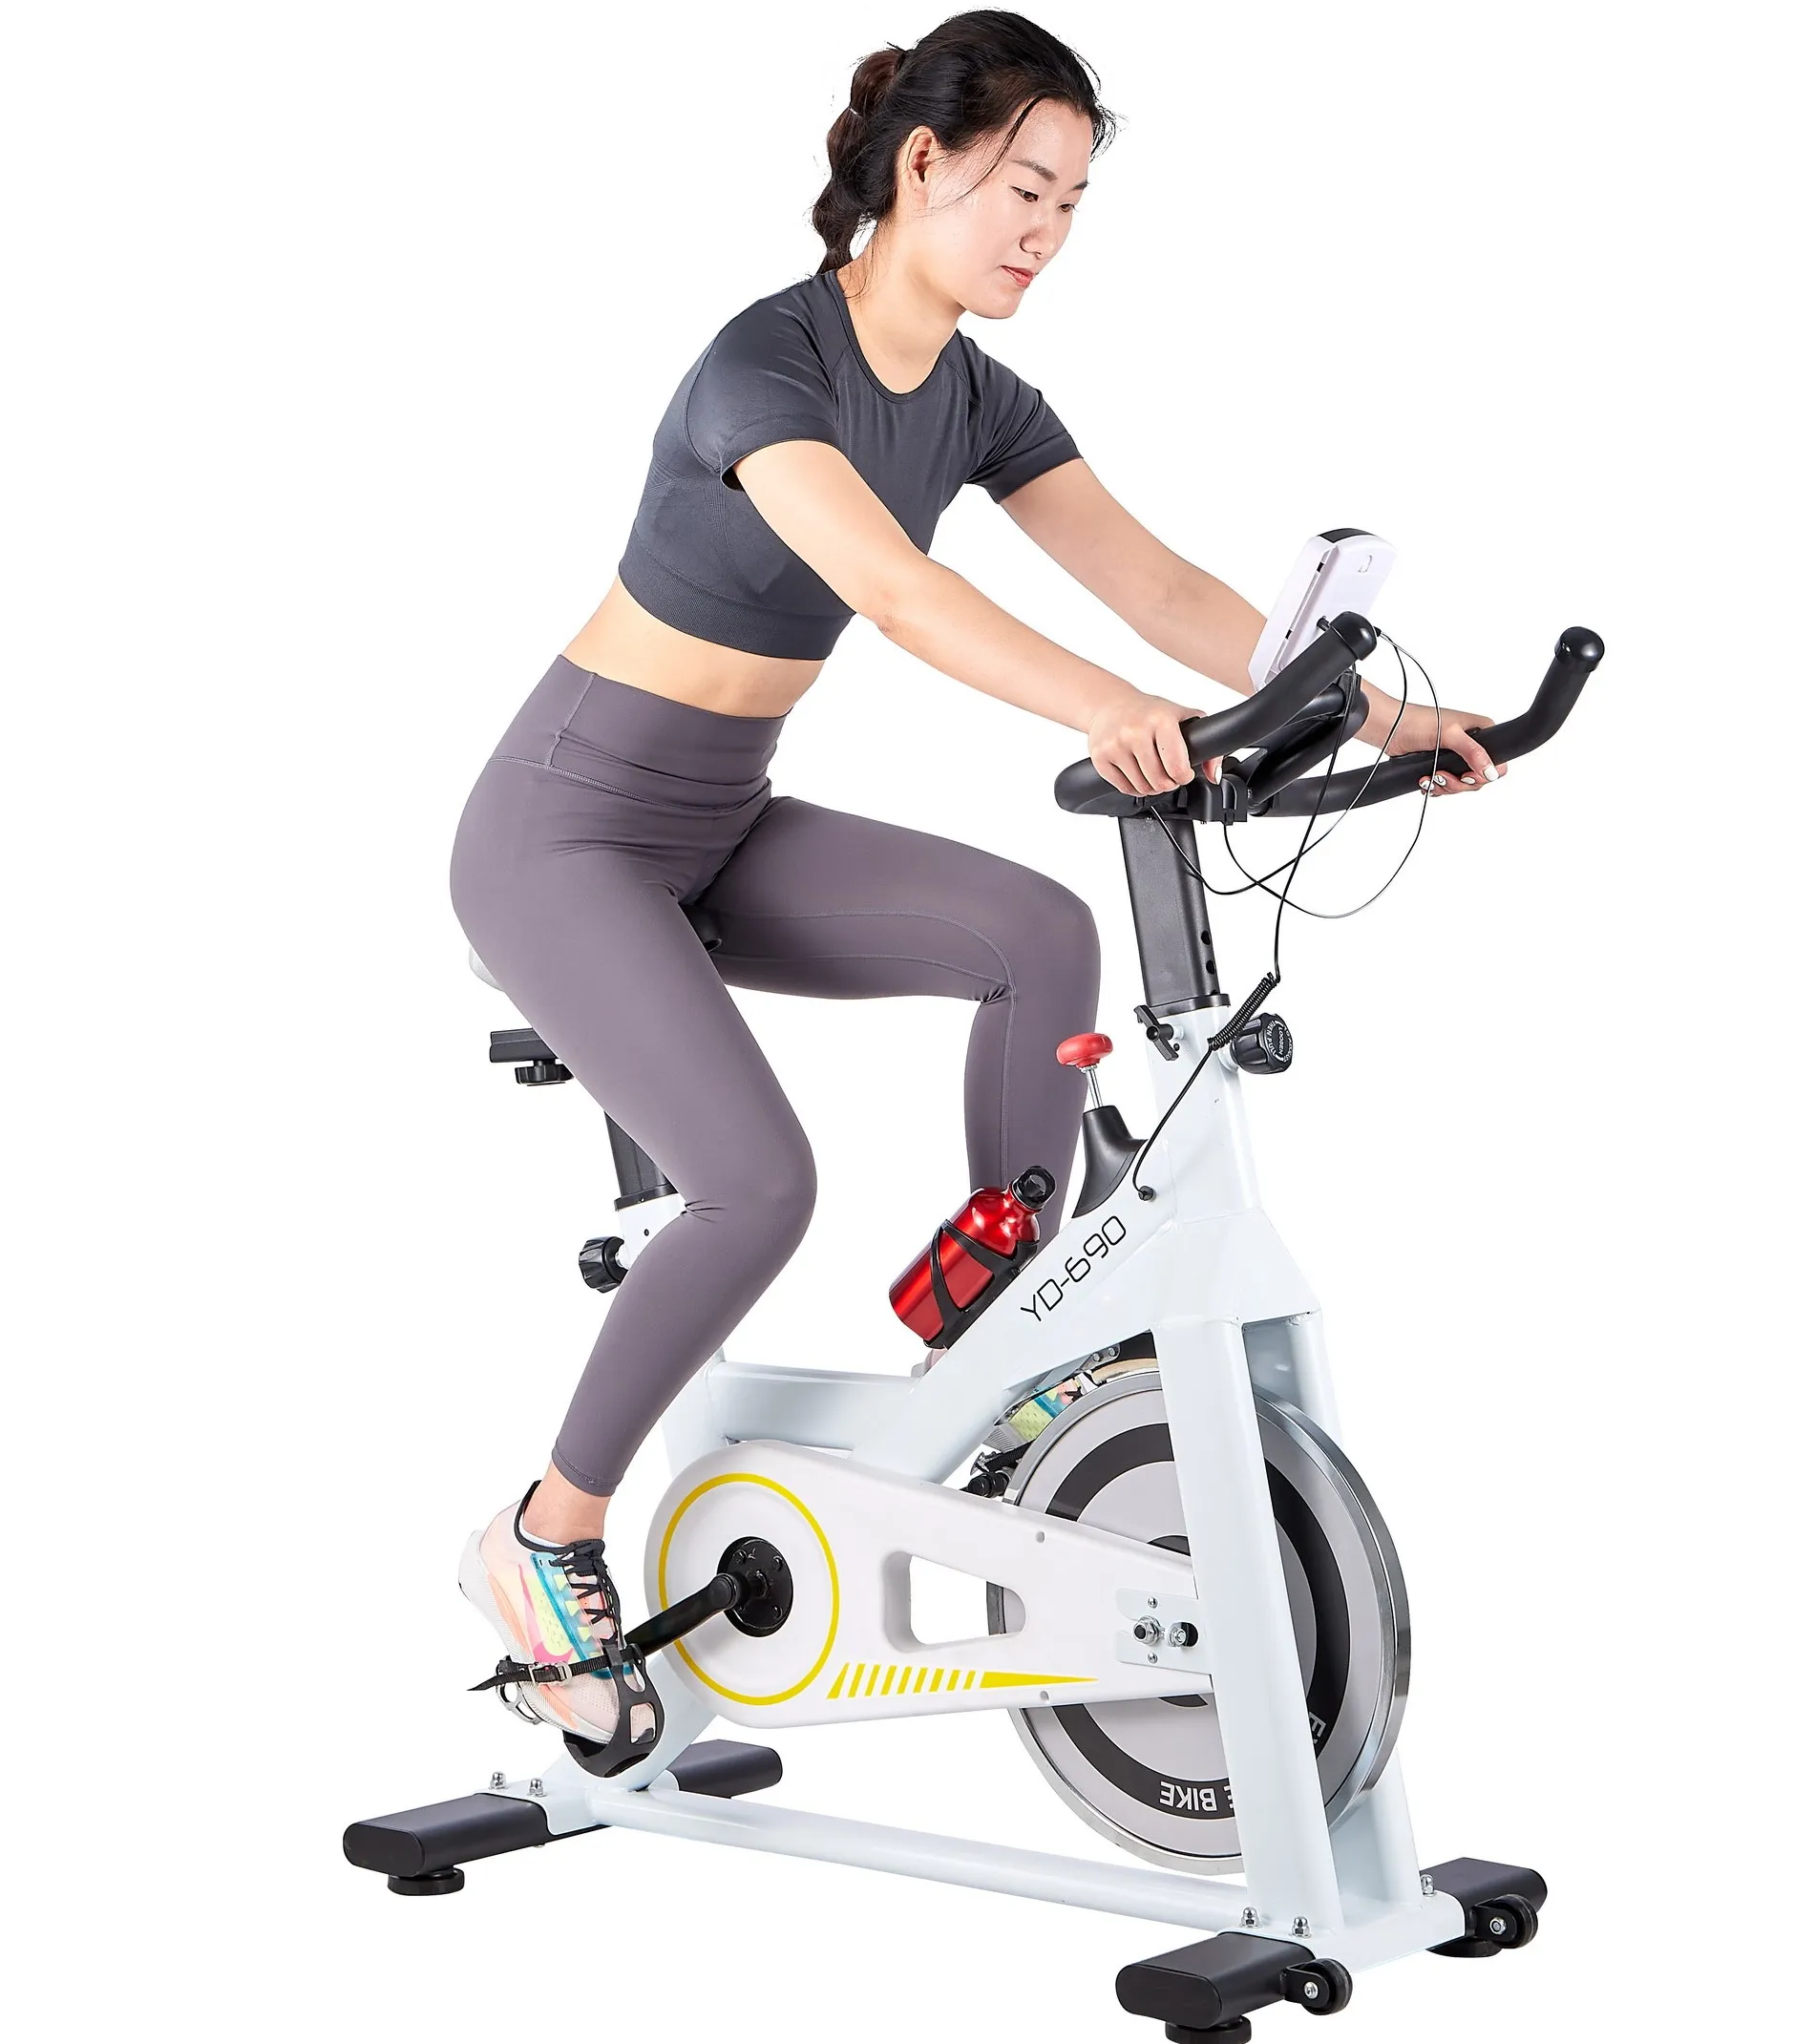 

Hot Sale Indoor Comercial Fitness Spin Bike Cycle Exercise Machine Home Gym Spinning Bikes With Screen